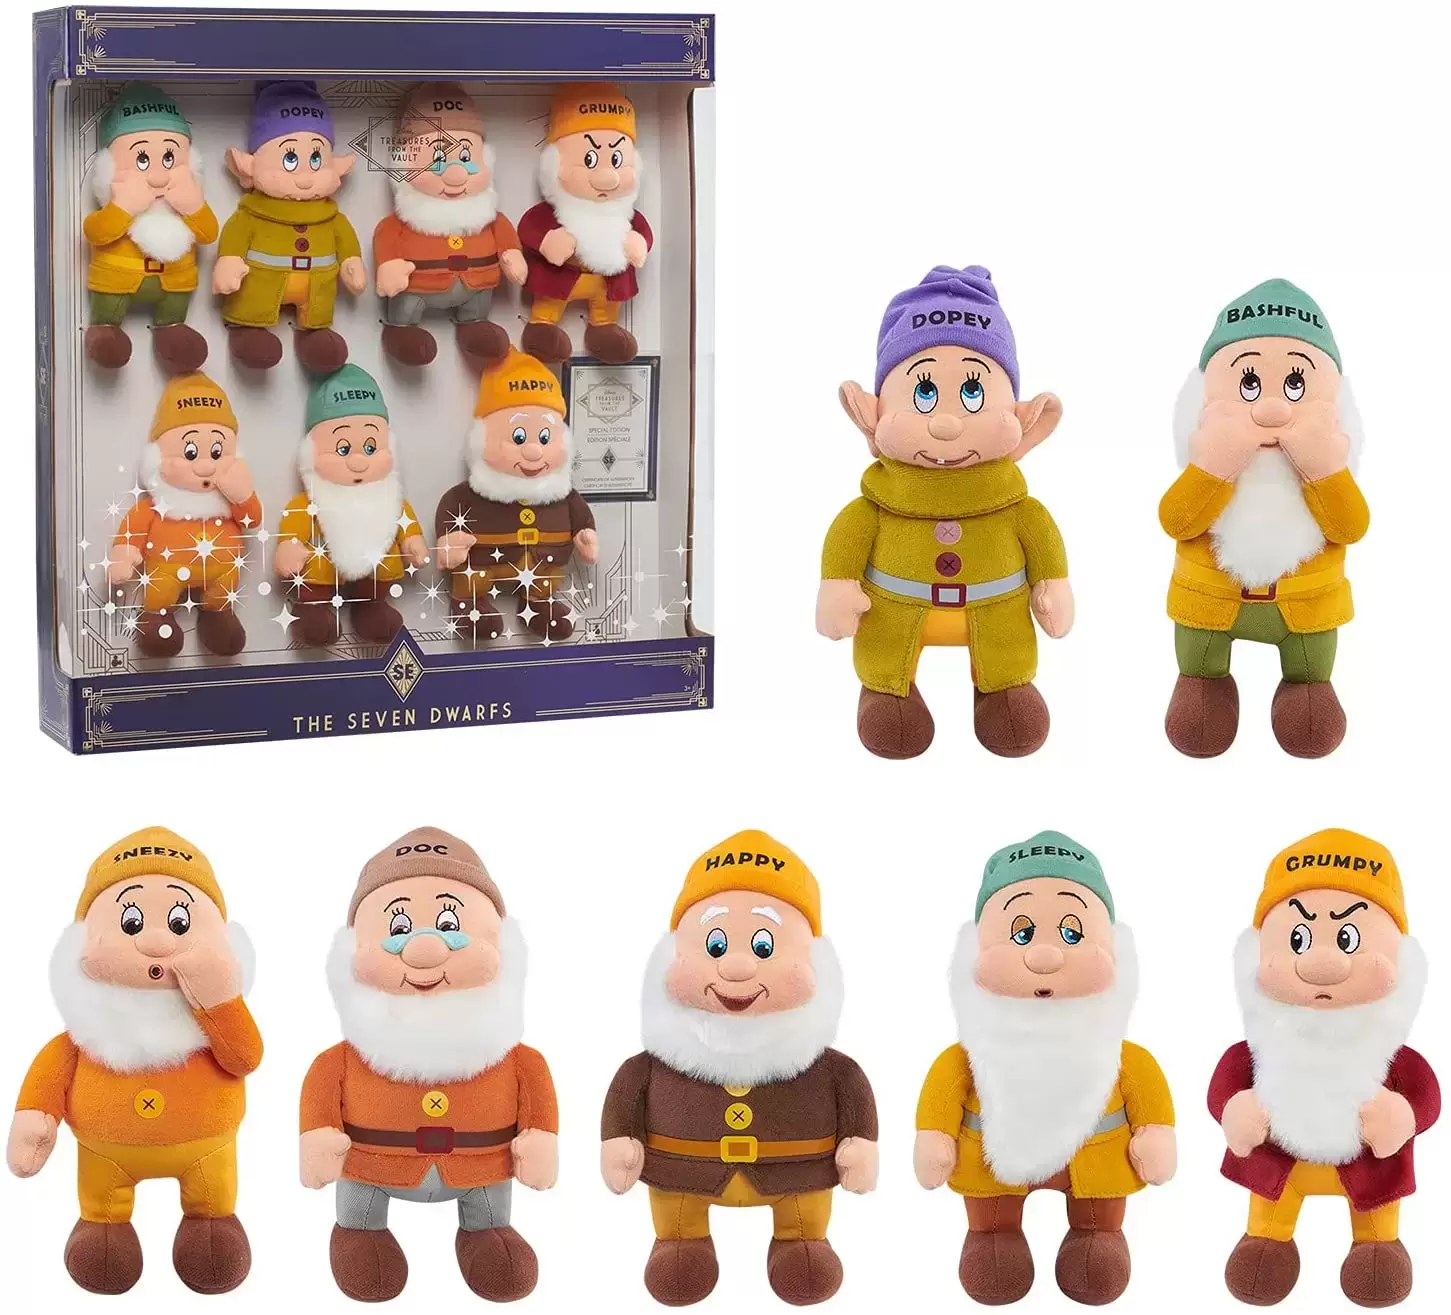 Peluches Disney Store - Disney Treasures from the Vault - The 7 Dwarfs